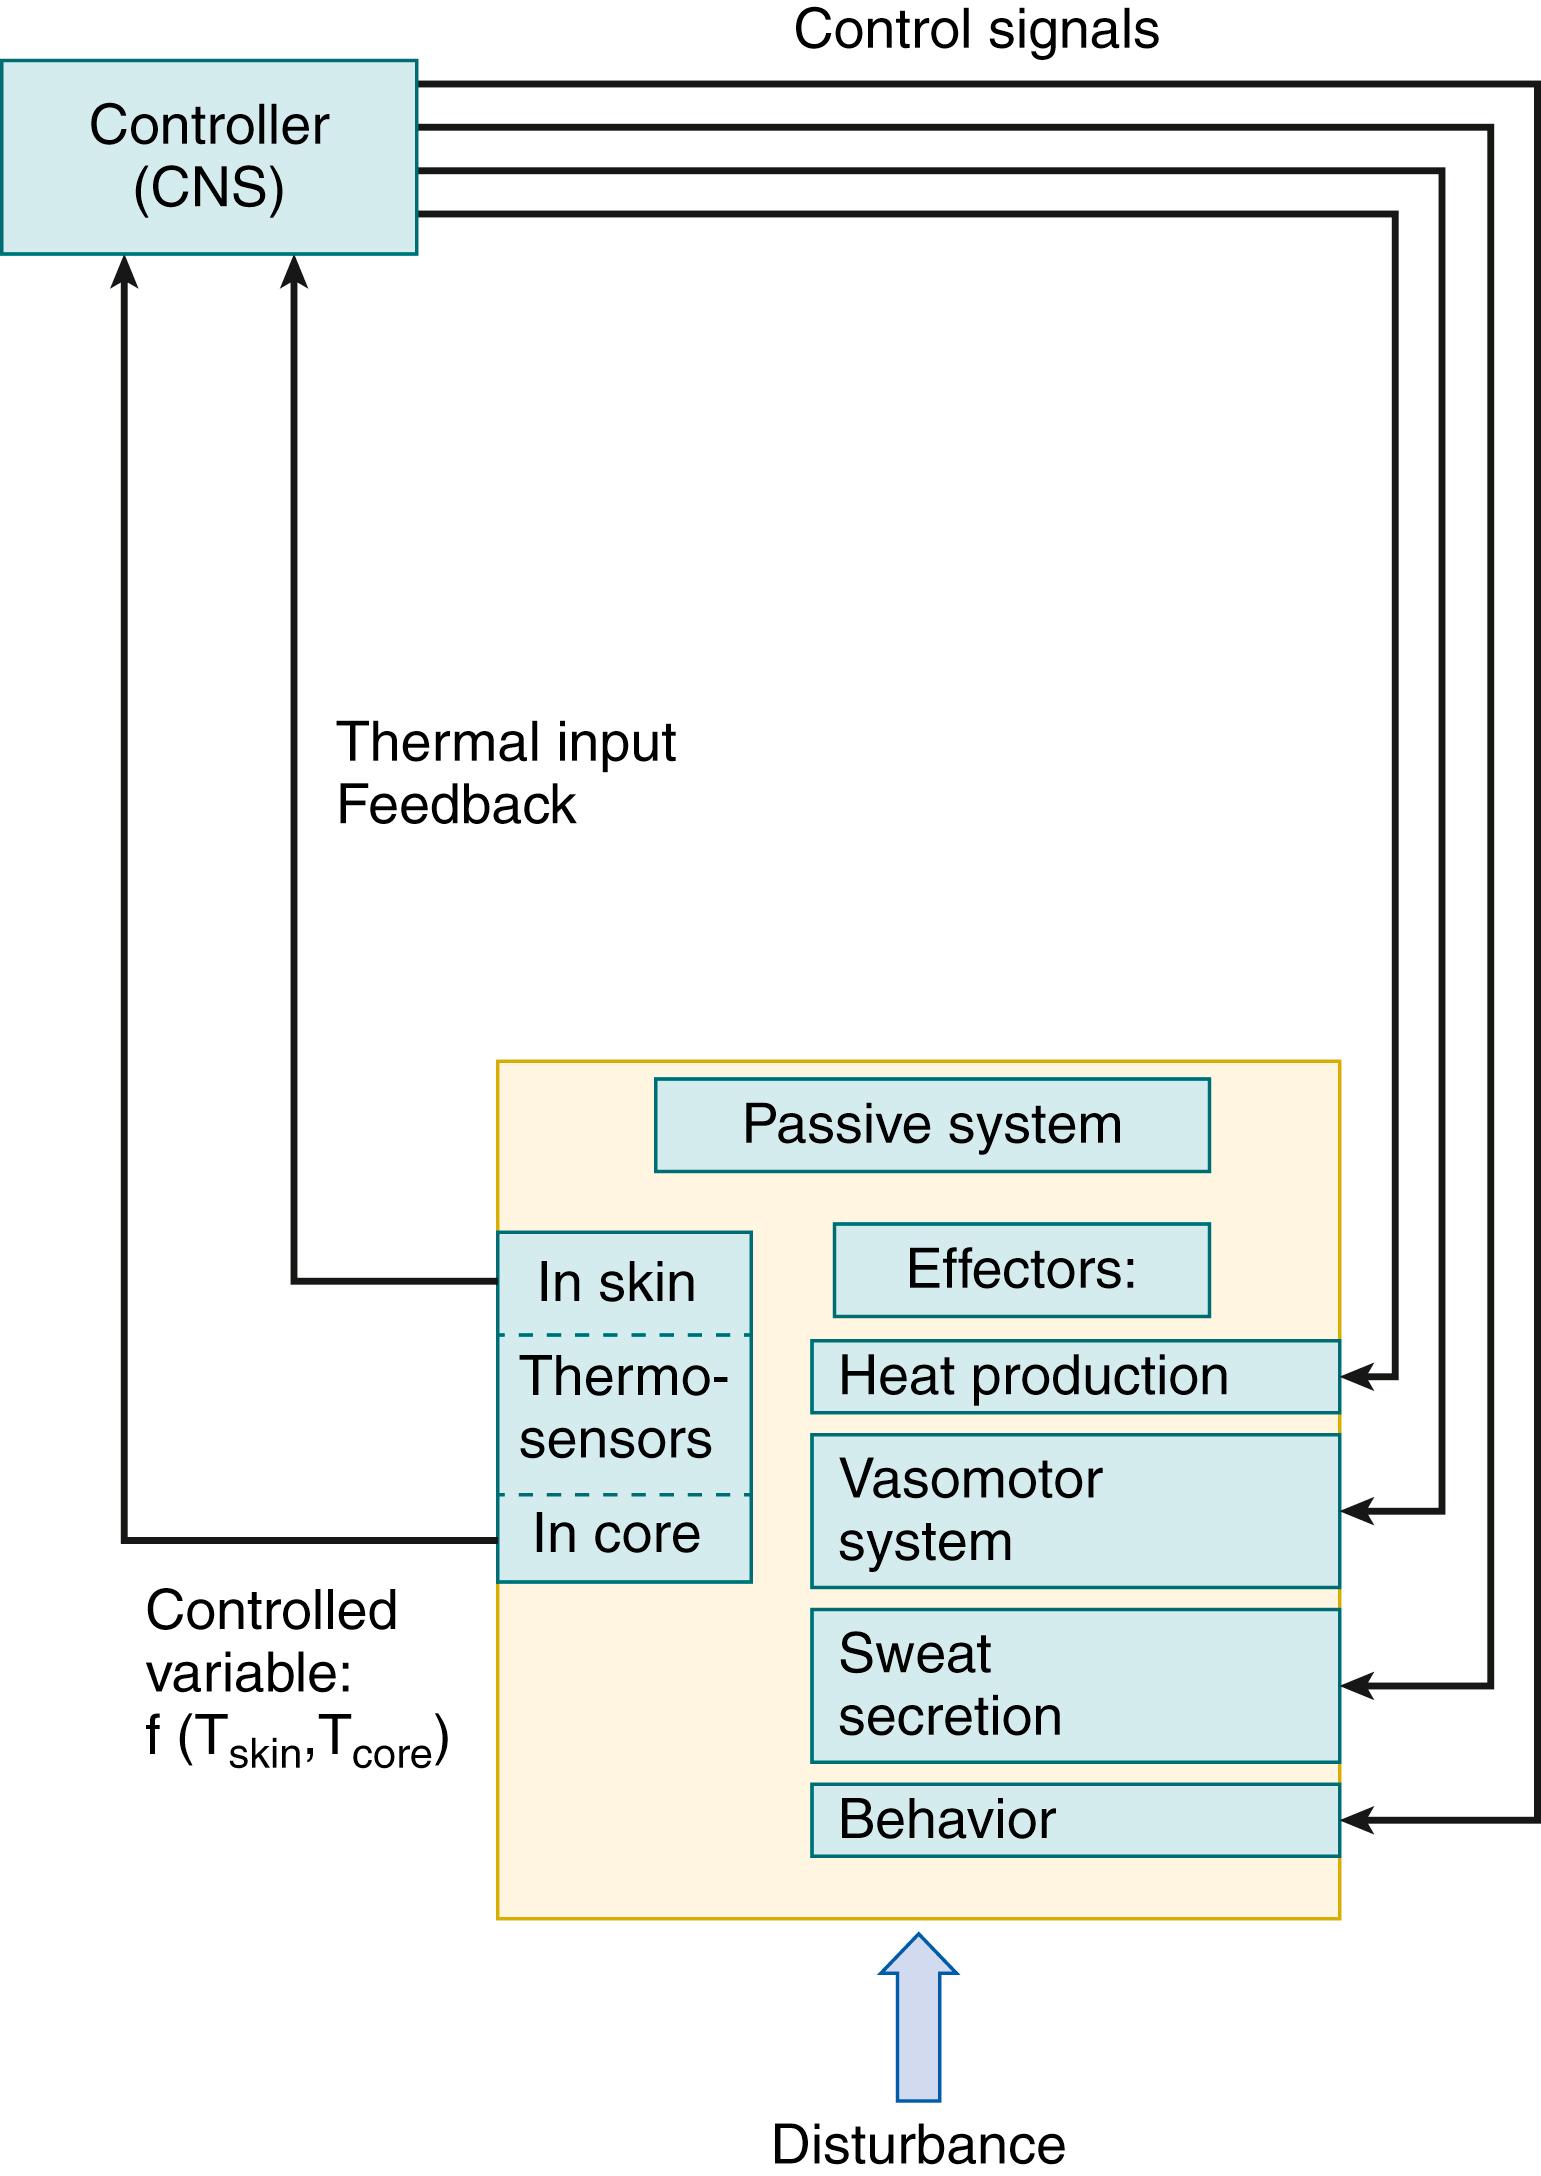 Fig. 42.1, Diagram representing the biocybernetic concept of temperature regulation in humans. Temperature is sensed at various sites of the body, and the temperature signals are fed into the central controller (multiple-input system). CNS , Central nervous system.